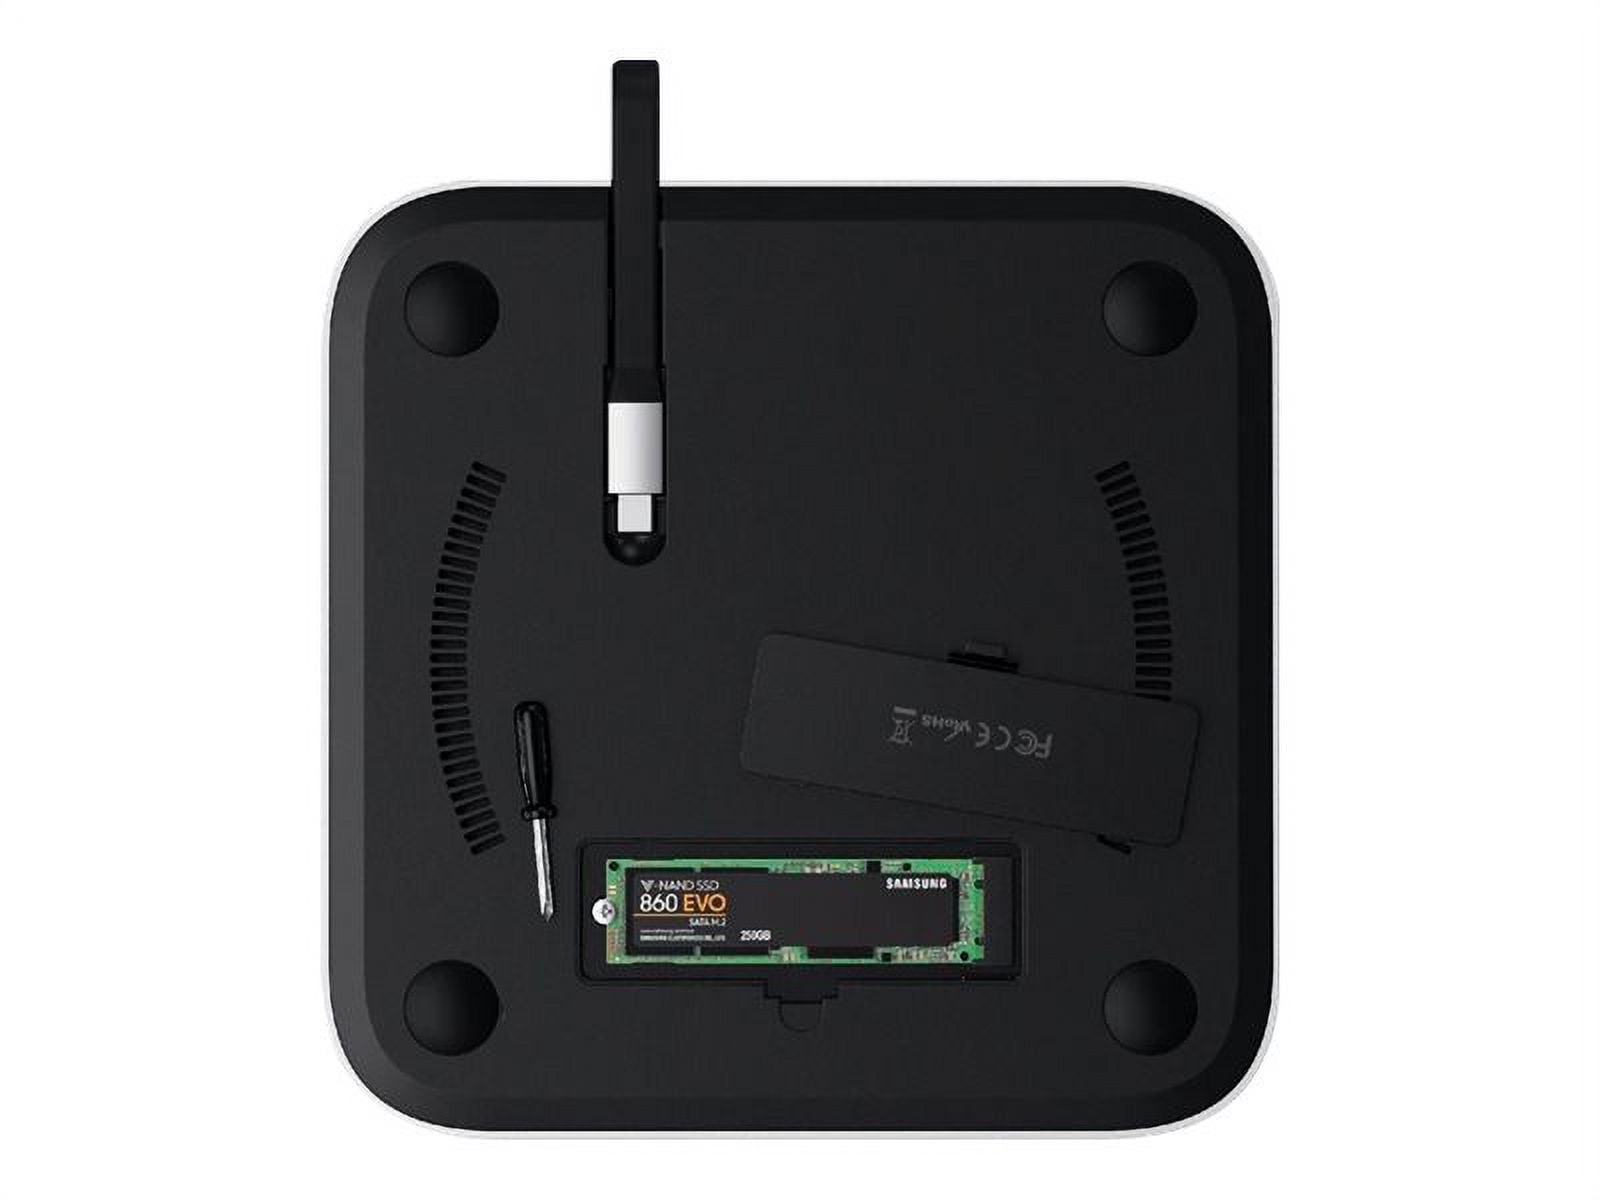 Stand & Hub for Mac Mini with SSD Enclosure on Vimeo